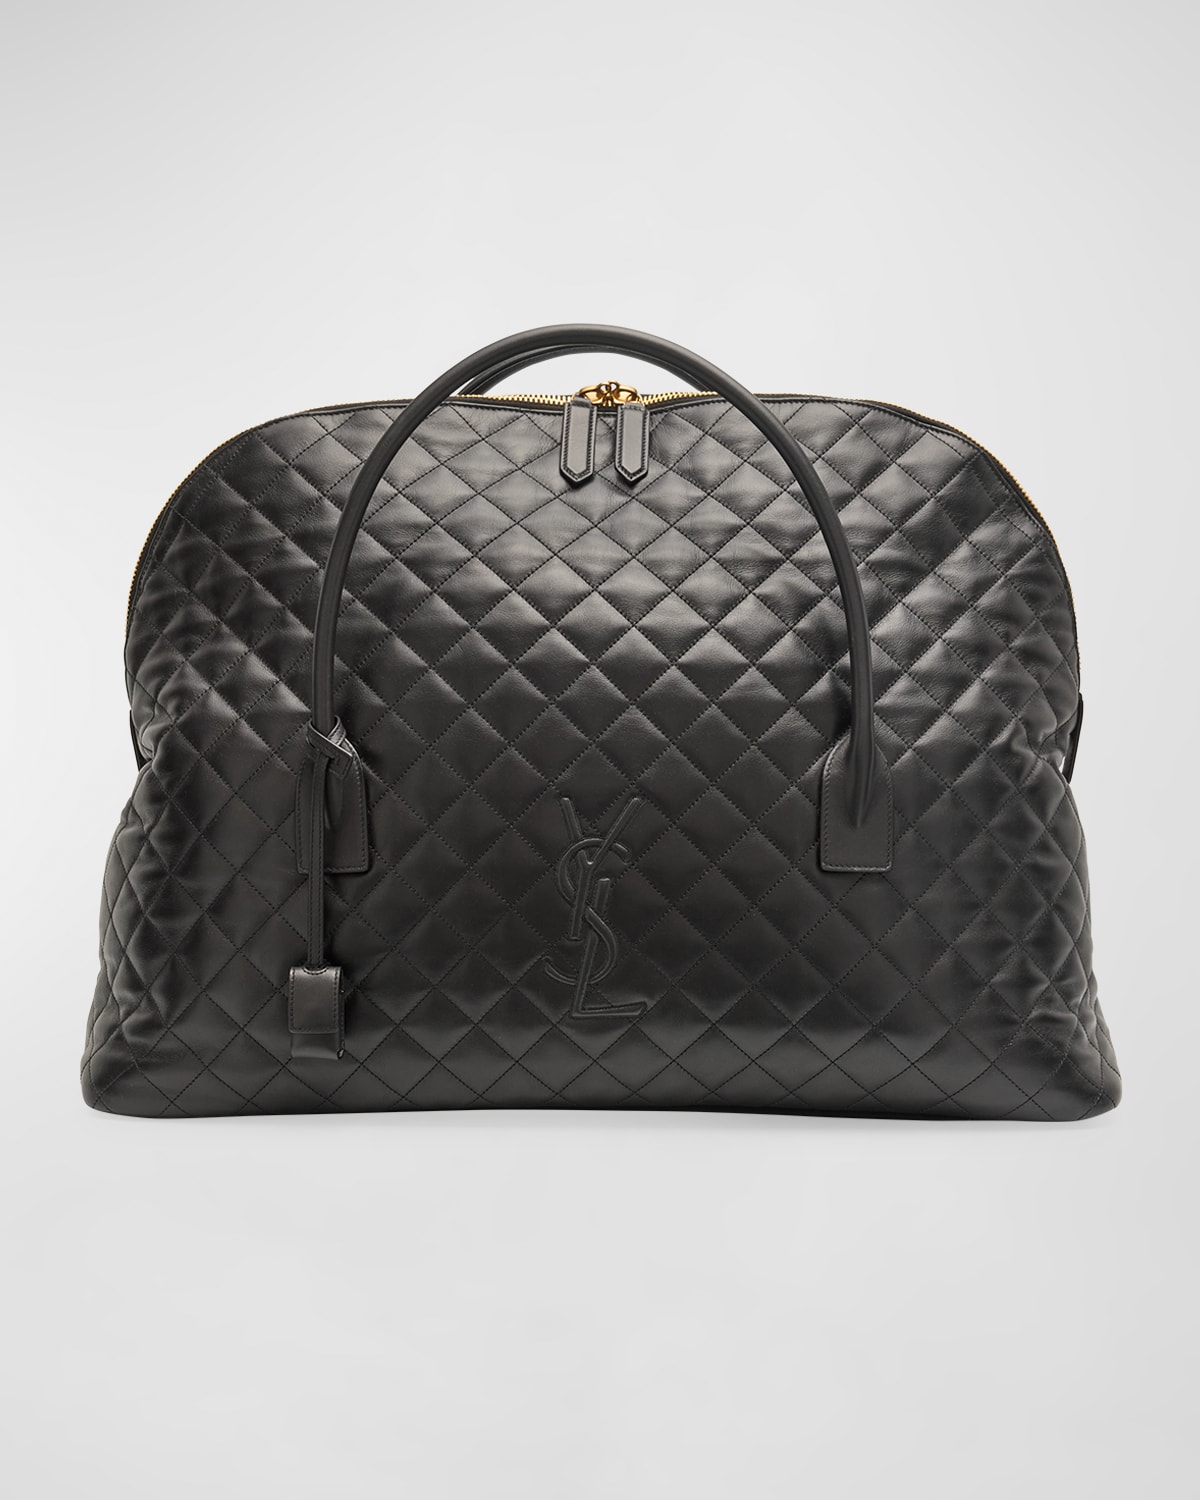 ES Giant Travel Bag in Smooth Quilted Leather with Gold Hardware